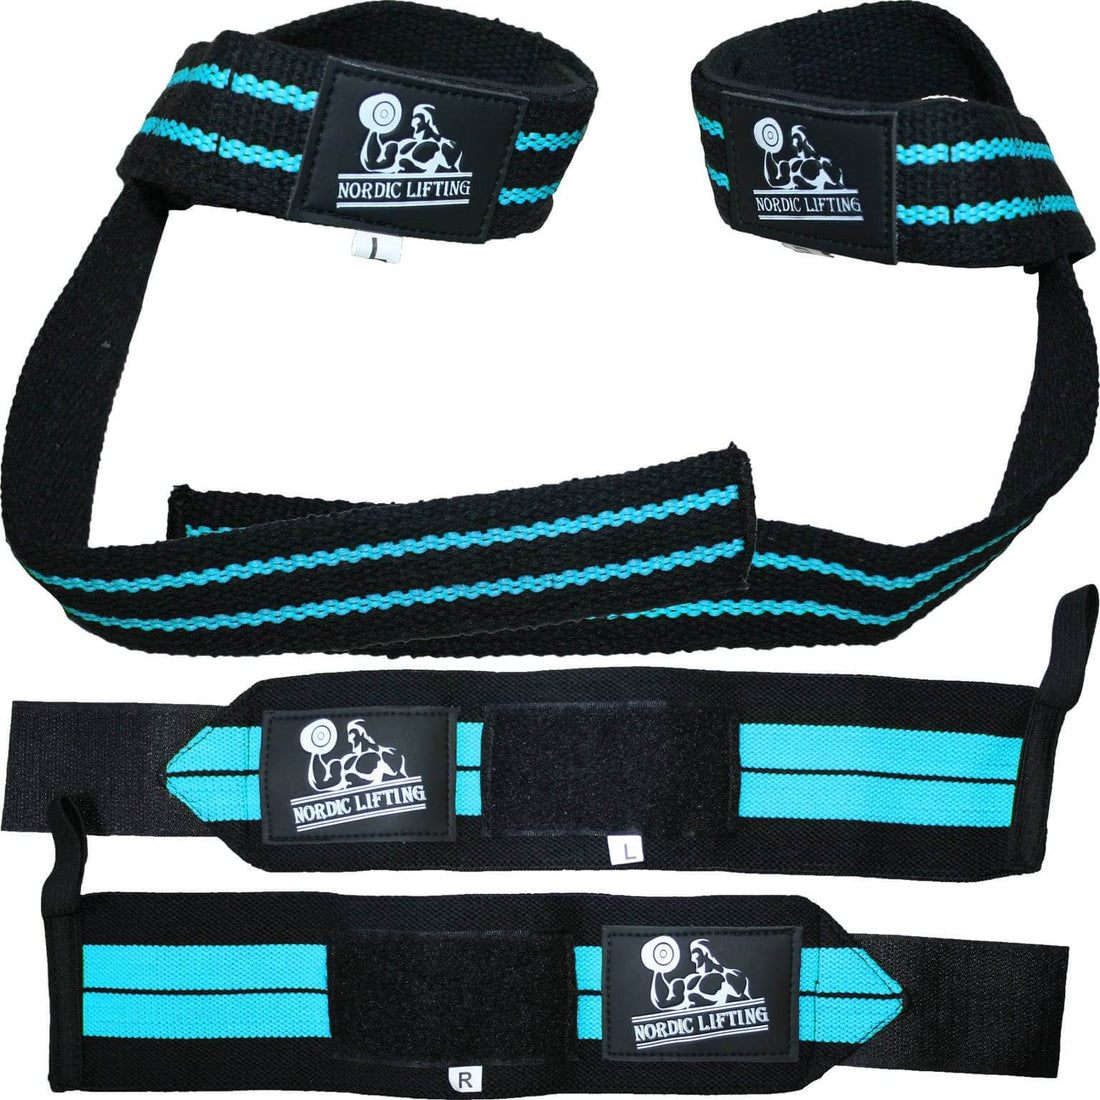 Nordic Lifting Wrist Wraps For Weightlifting